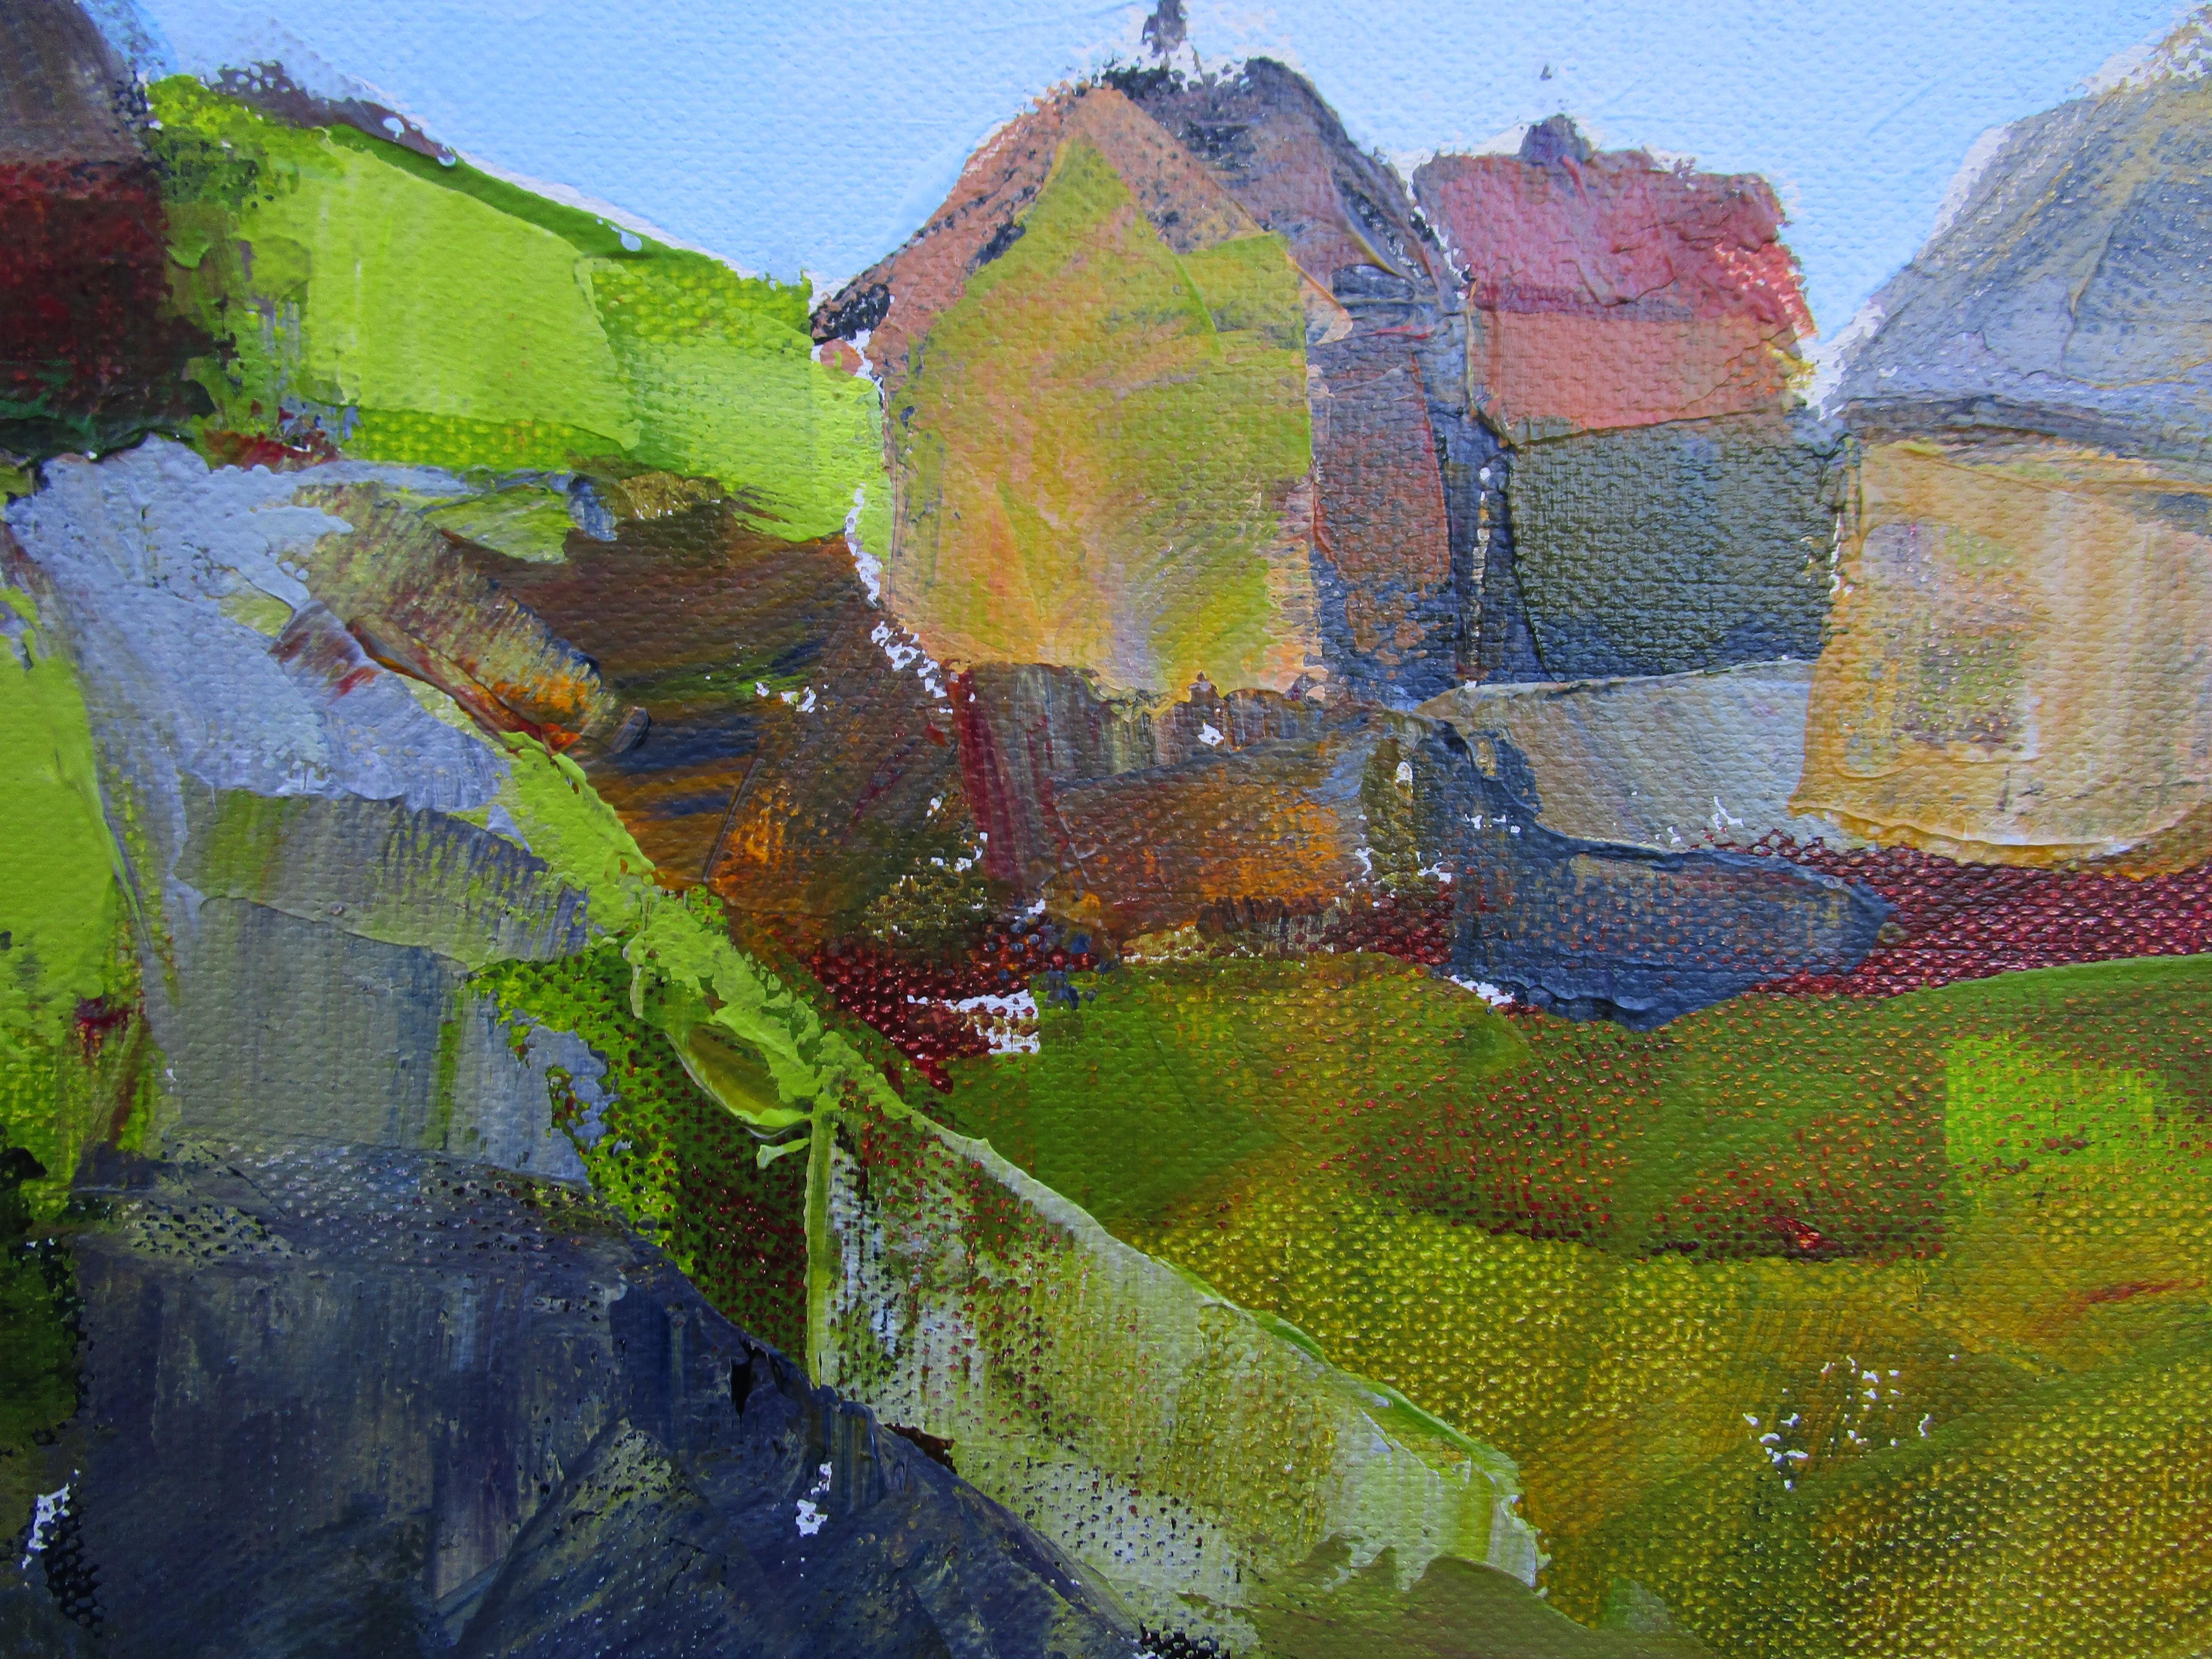 <p>Artist Comments<br>A rustic farm stretches over the field in artist Janet Dyer's impressionist landscape. The charming Cornwall scene depicts the buildings clustered around the road, almost like a little village. Janet uses both a brush and a